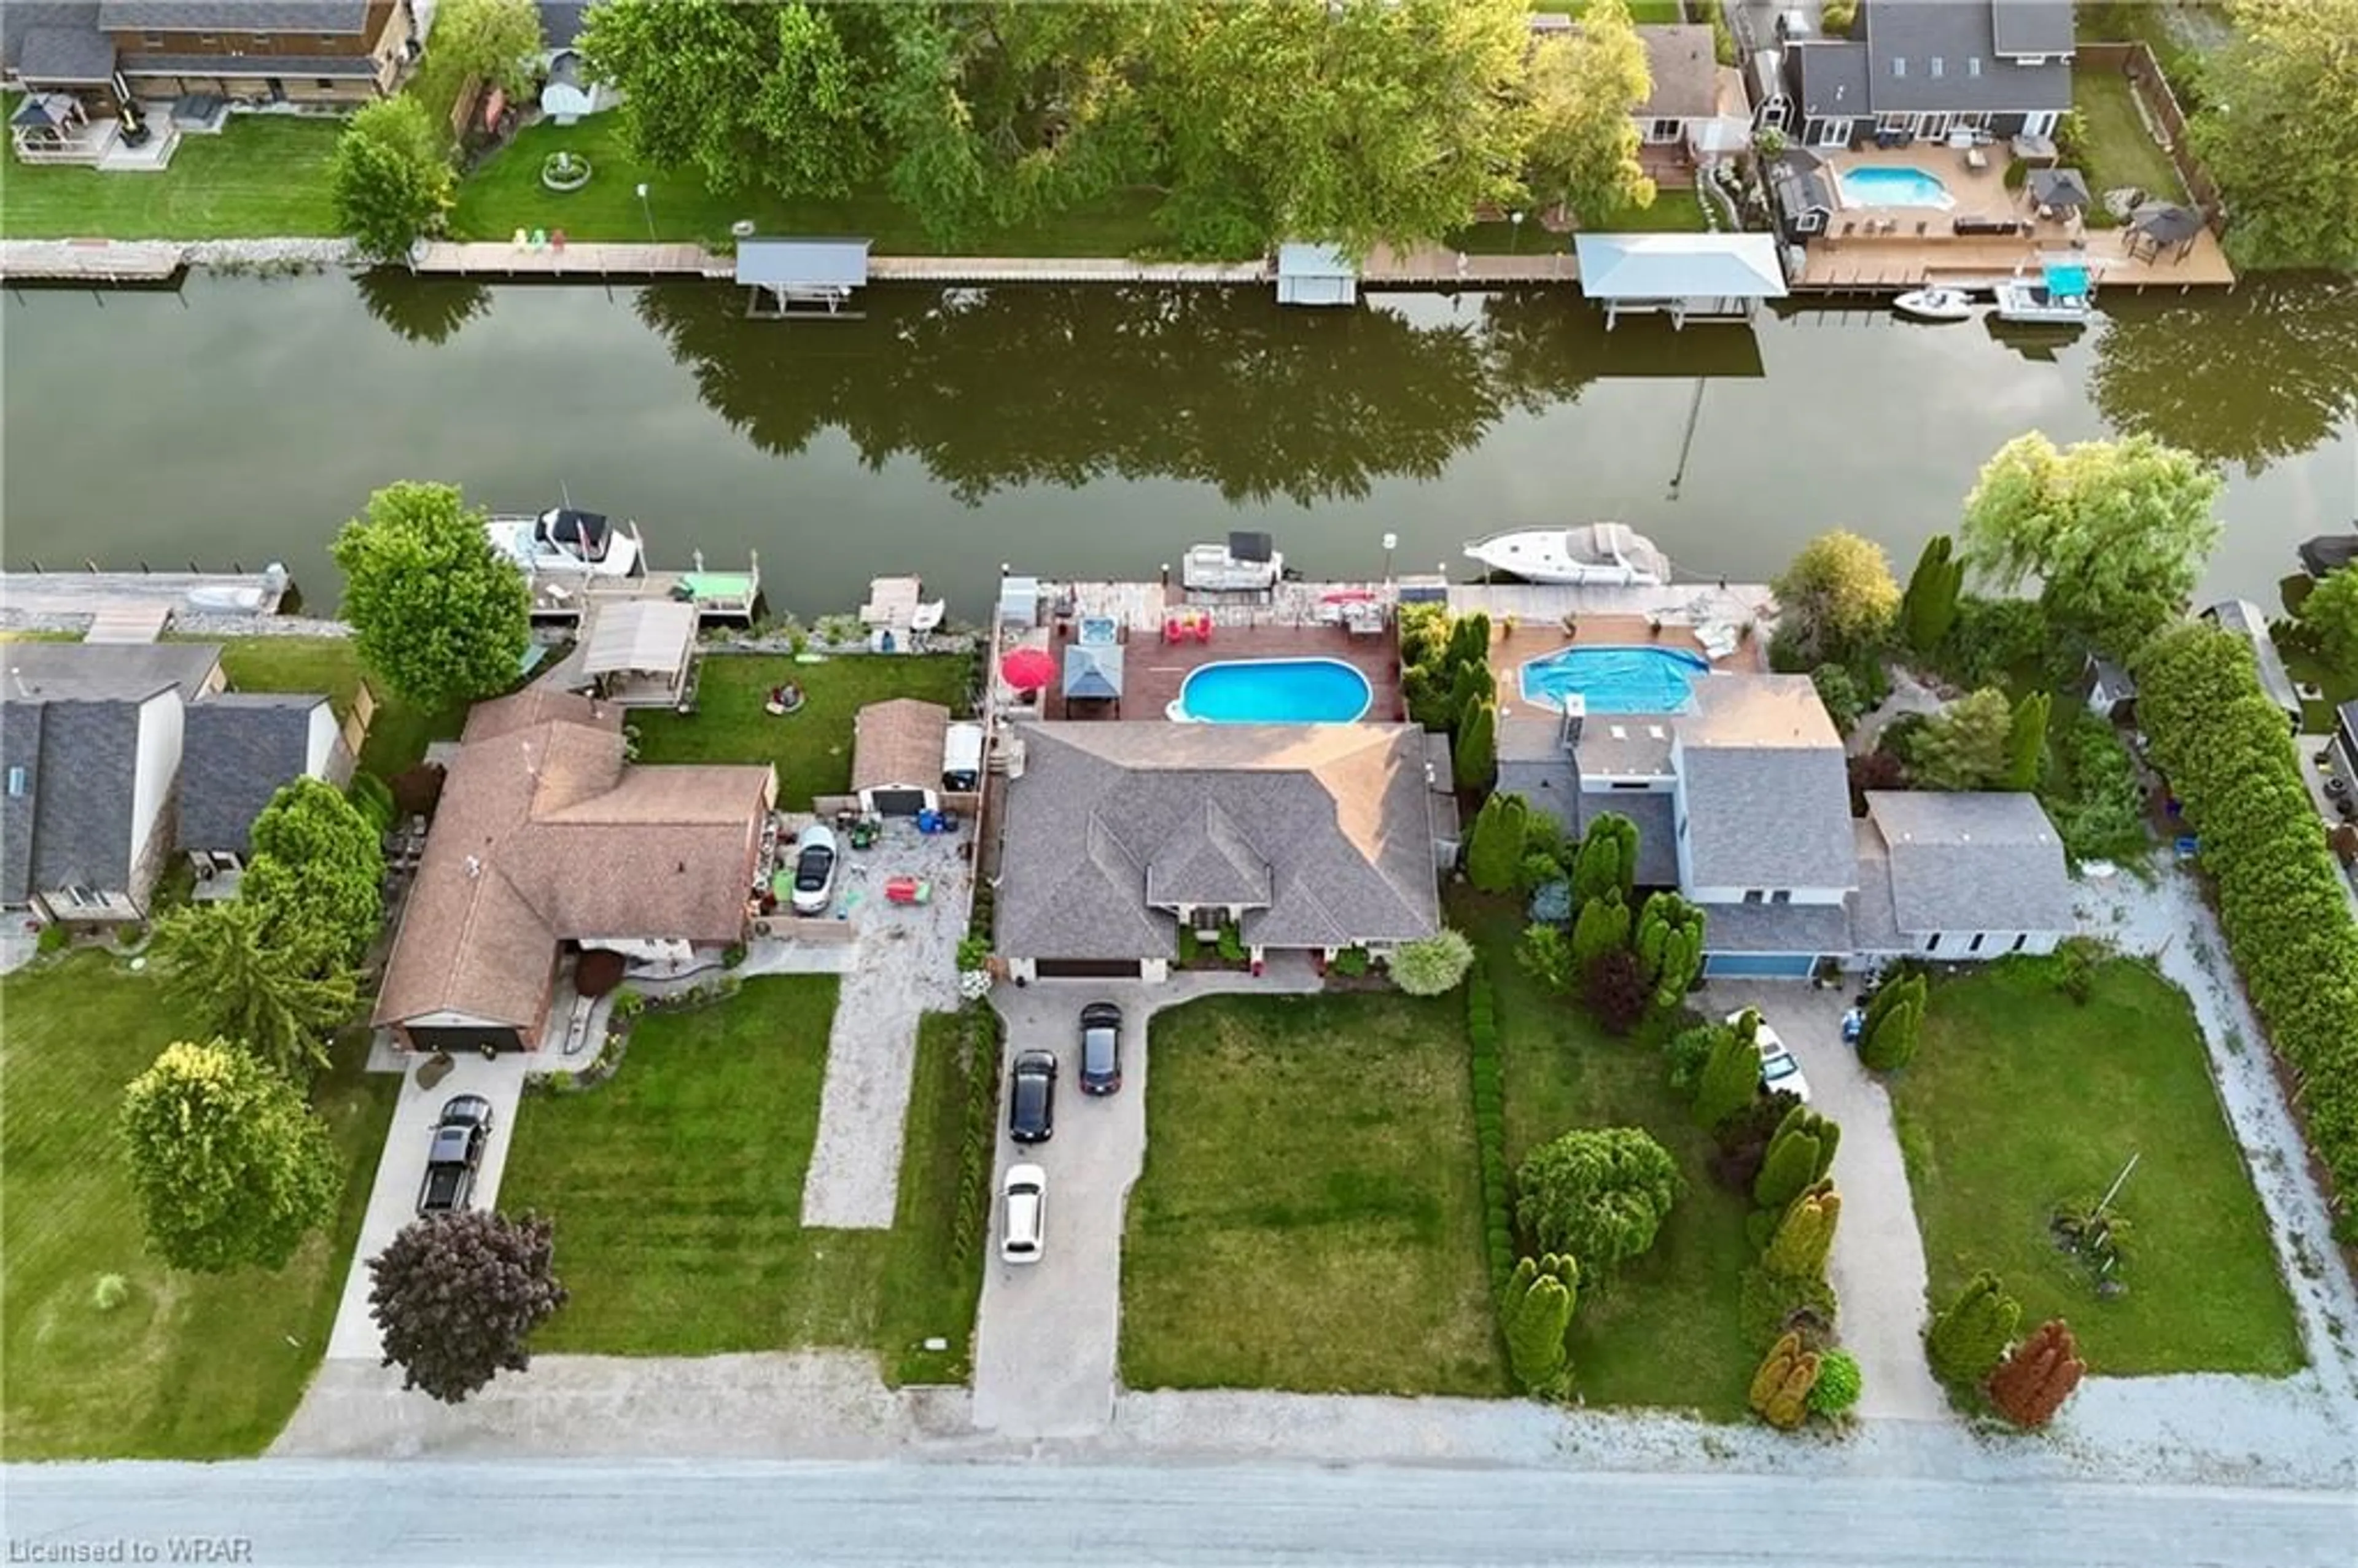 Lakeview for 811 Rivait Dr, Tilbury Ontario N0P 2L0